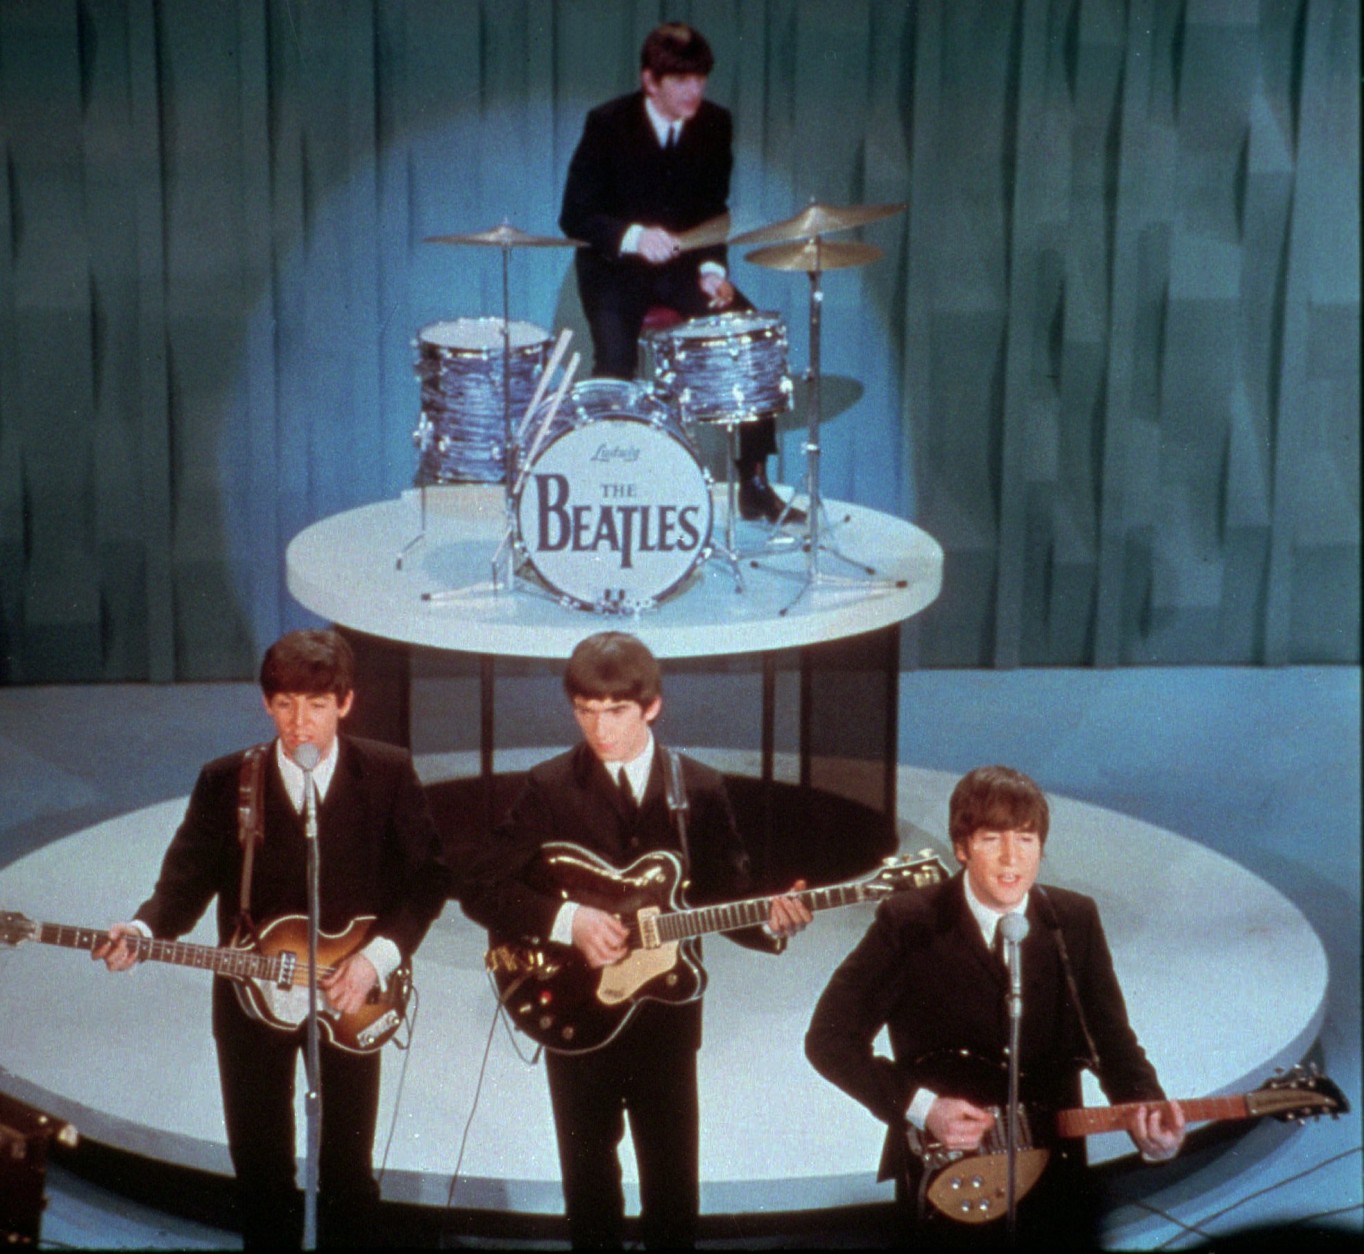 FILE - In this Feb. 9, 1964 file photo, The Beatles, front row from left, Paul McCartney, George Harrison, John Lennon and Ringo Starr on drums, perform at the "Ed Sullivan Show," in New York. BlueBeat.com has agreed to pay $950,000 to settle a lawsuit filed by the music companies EMI, Capitol Records and Virgin Records America after posting digital copies of The Beatles music a year before they became legitimately available. (AP Photo, file)